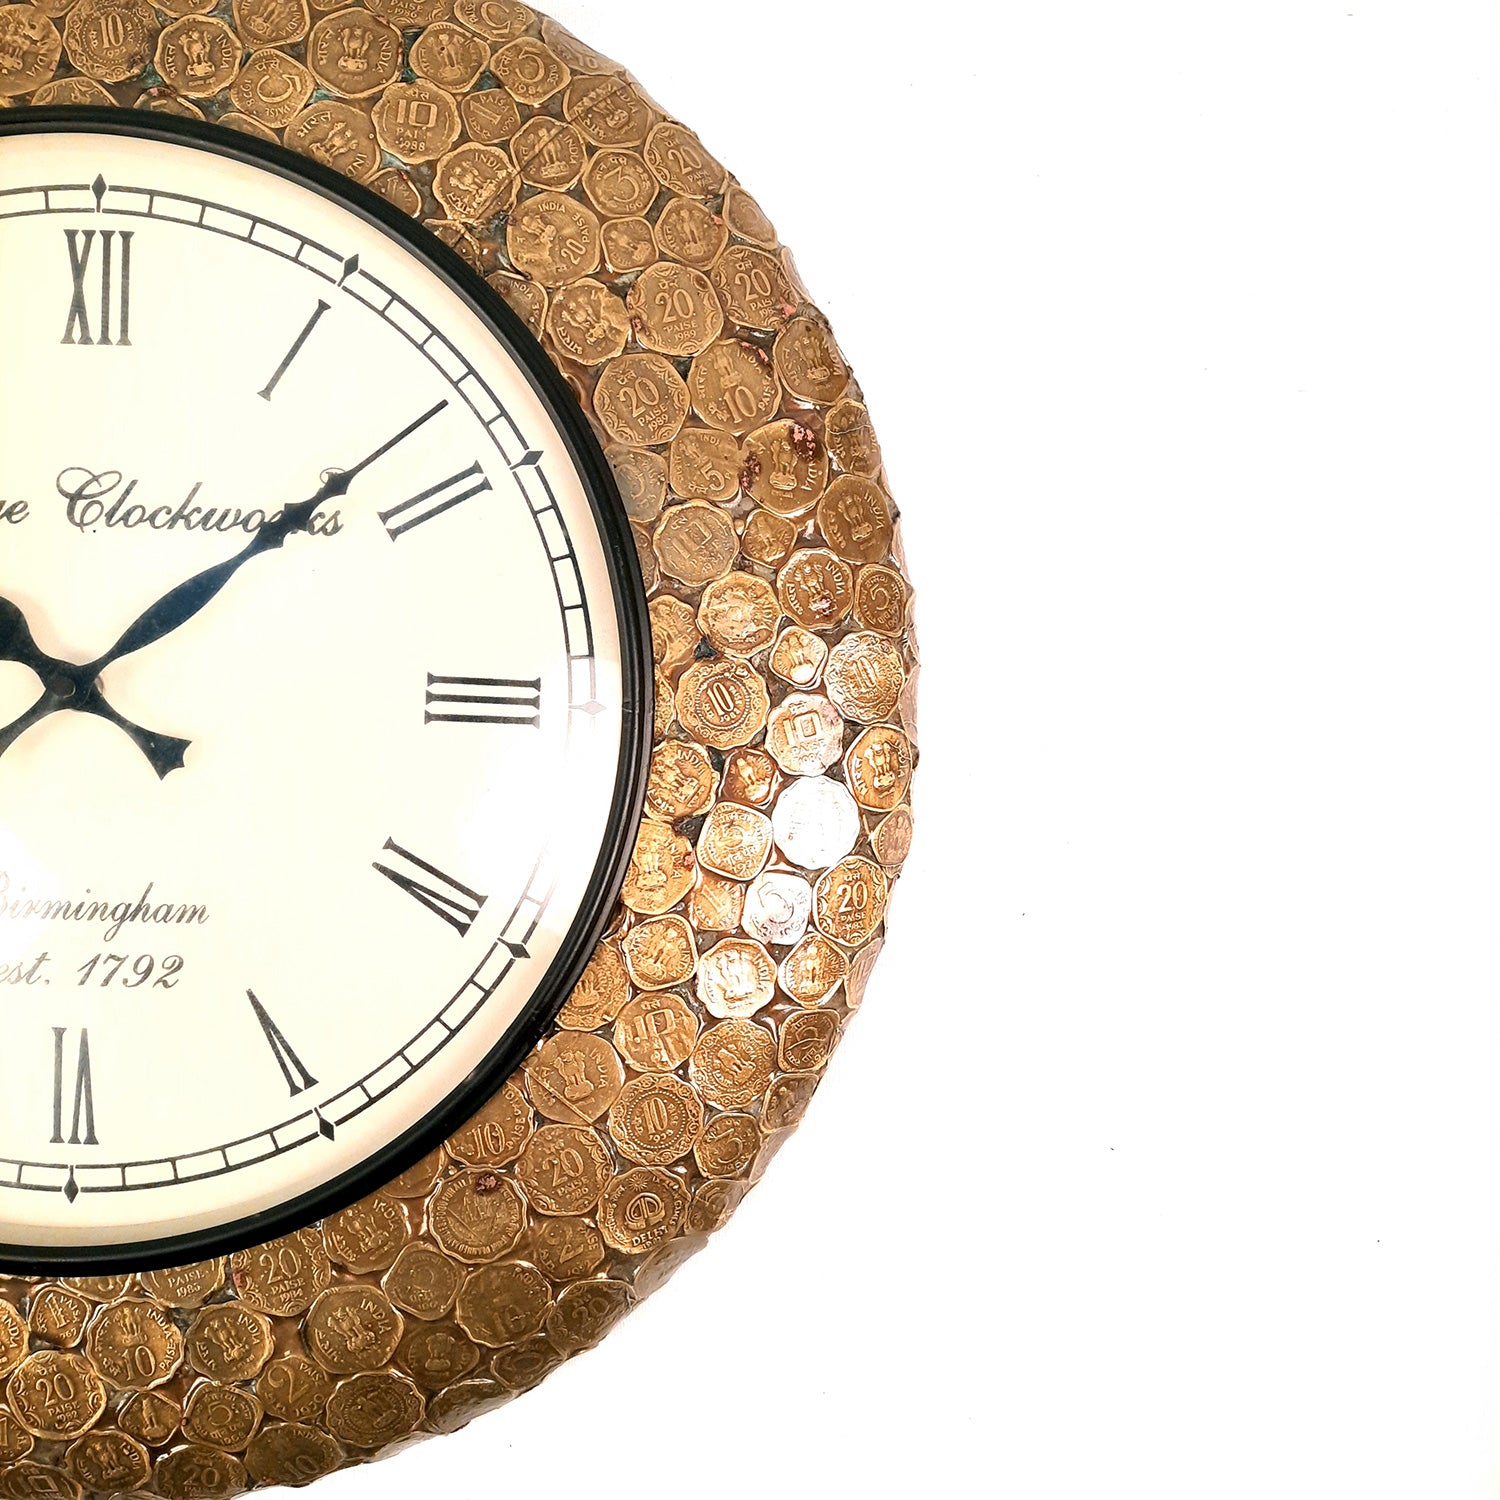 Wall Clock Vintage | Wall Mount Clock Antique With Old Coins Design - For Home, Office, Bedroom, Hall Decor & Gifts | Wedding & Housewarming Gift - 18 Inch - Apkamart